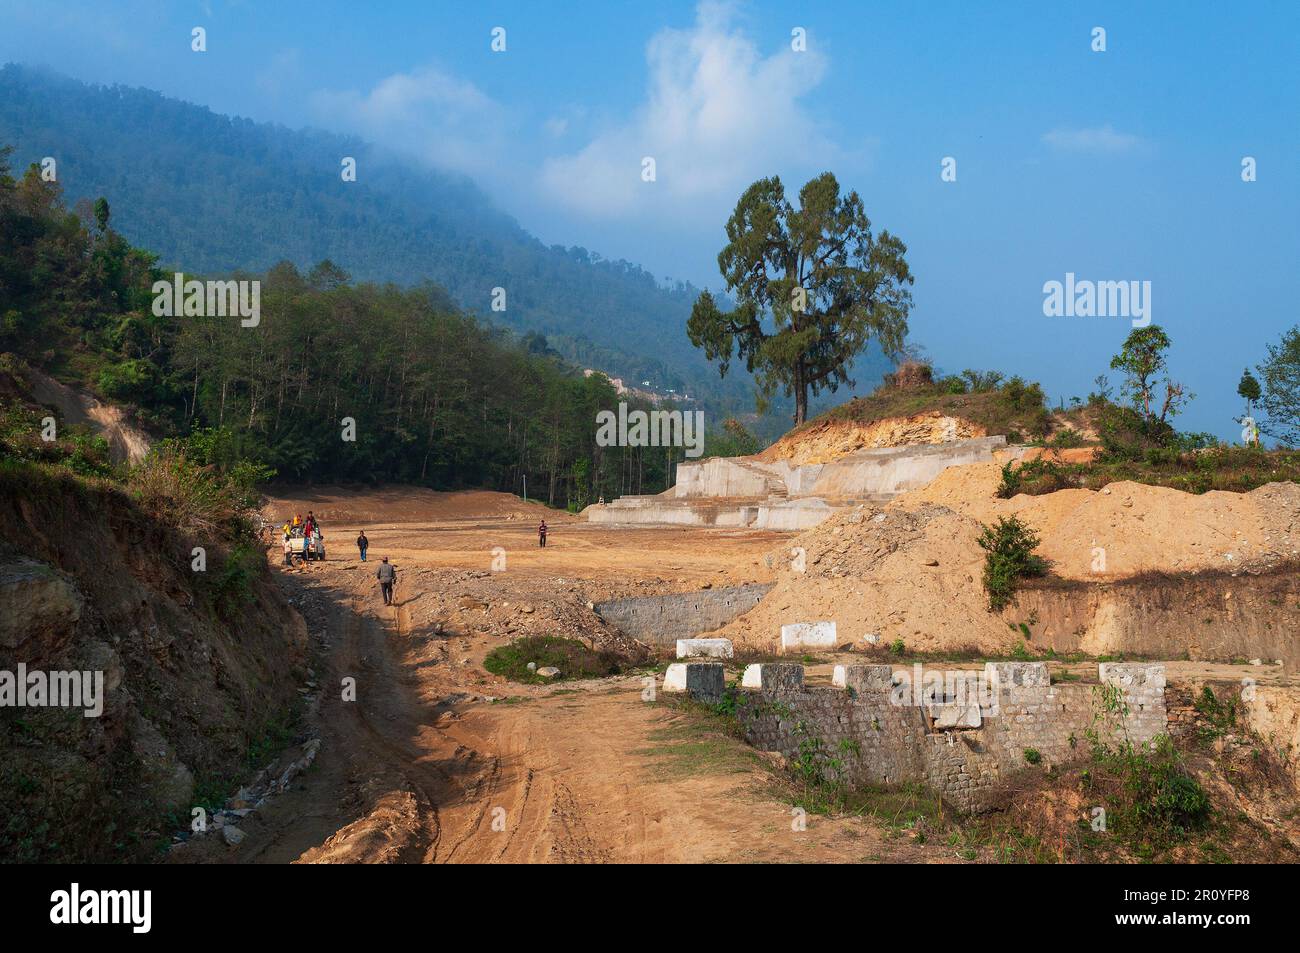 High altitude playground and stadium is being made by cutting tree and levelling Himalayan soil, Environmental damage to Himalayan mountains. Stock Photo